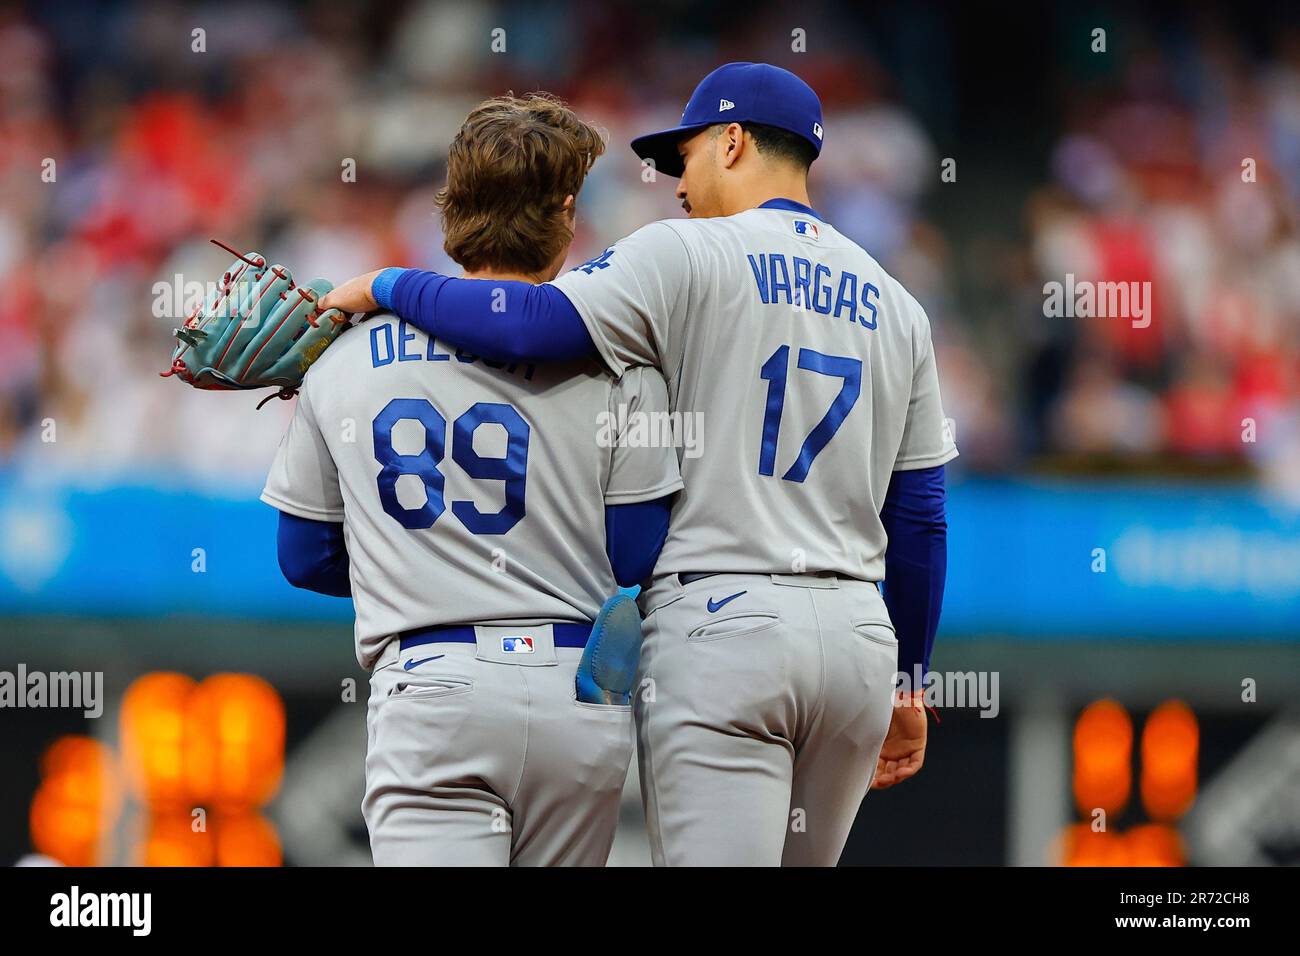 PHILADELPHIA, PA - JUNE 09: Jonny DeLuca #89 of the Los Angeles Dodgers and  Miguel Vargas #17 of the Los Angeles Dodgers during the game against the  Philadelphia Phillies at Citizens Bank